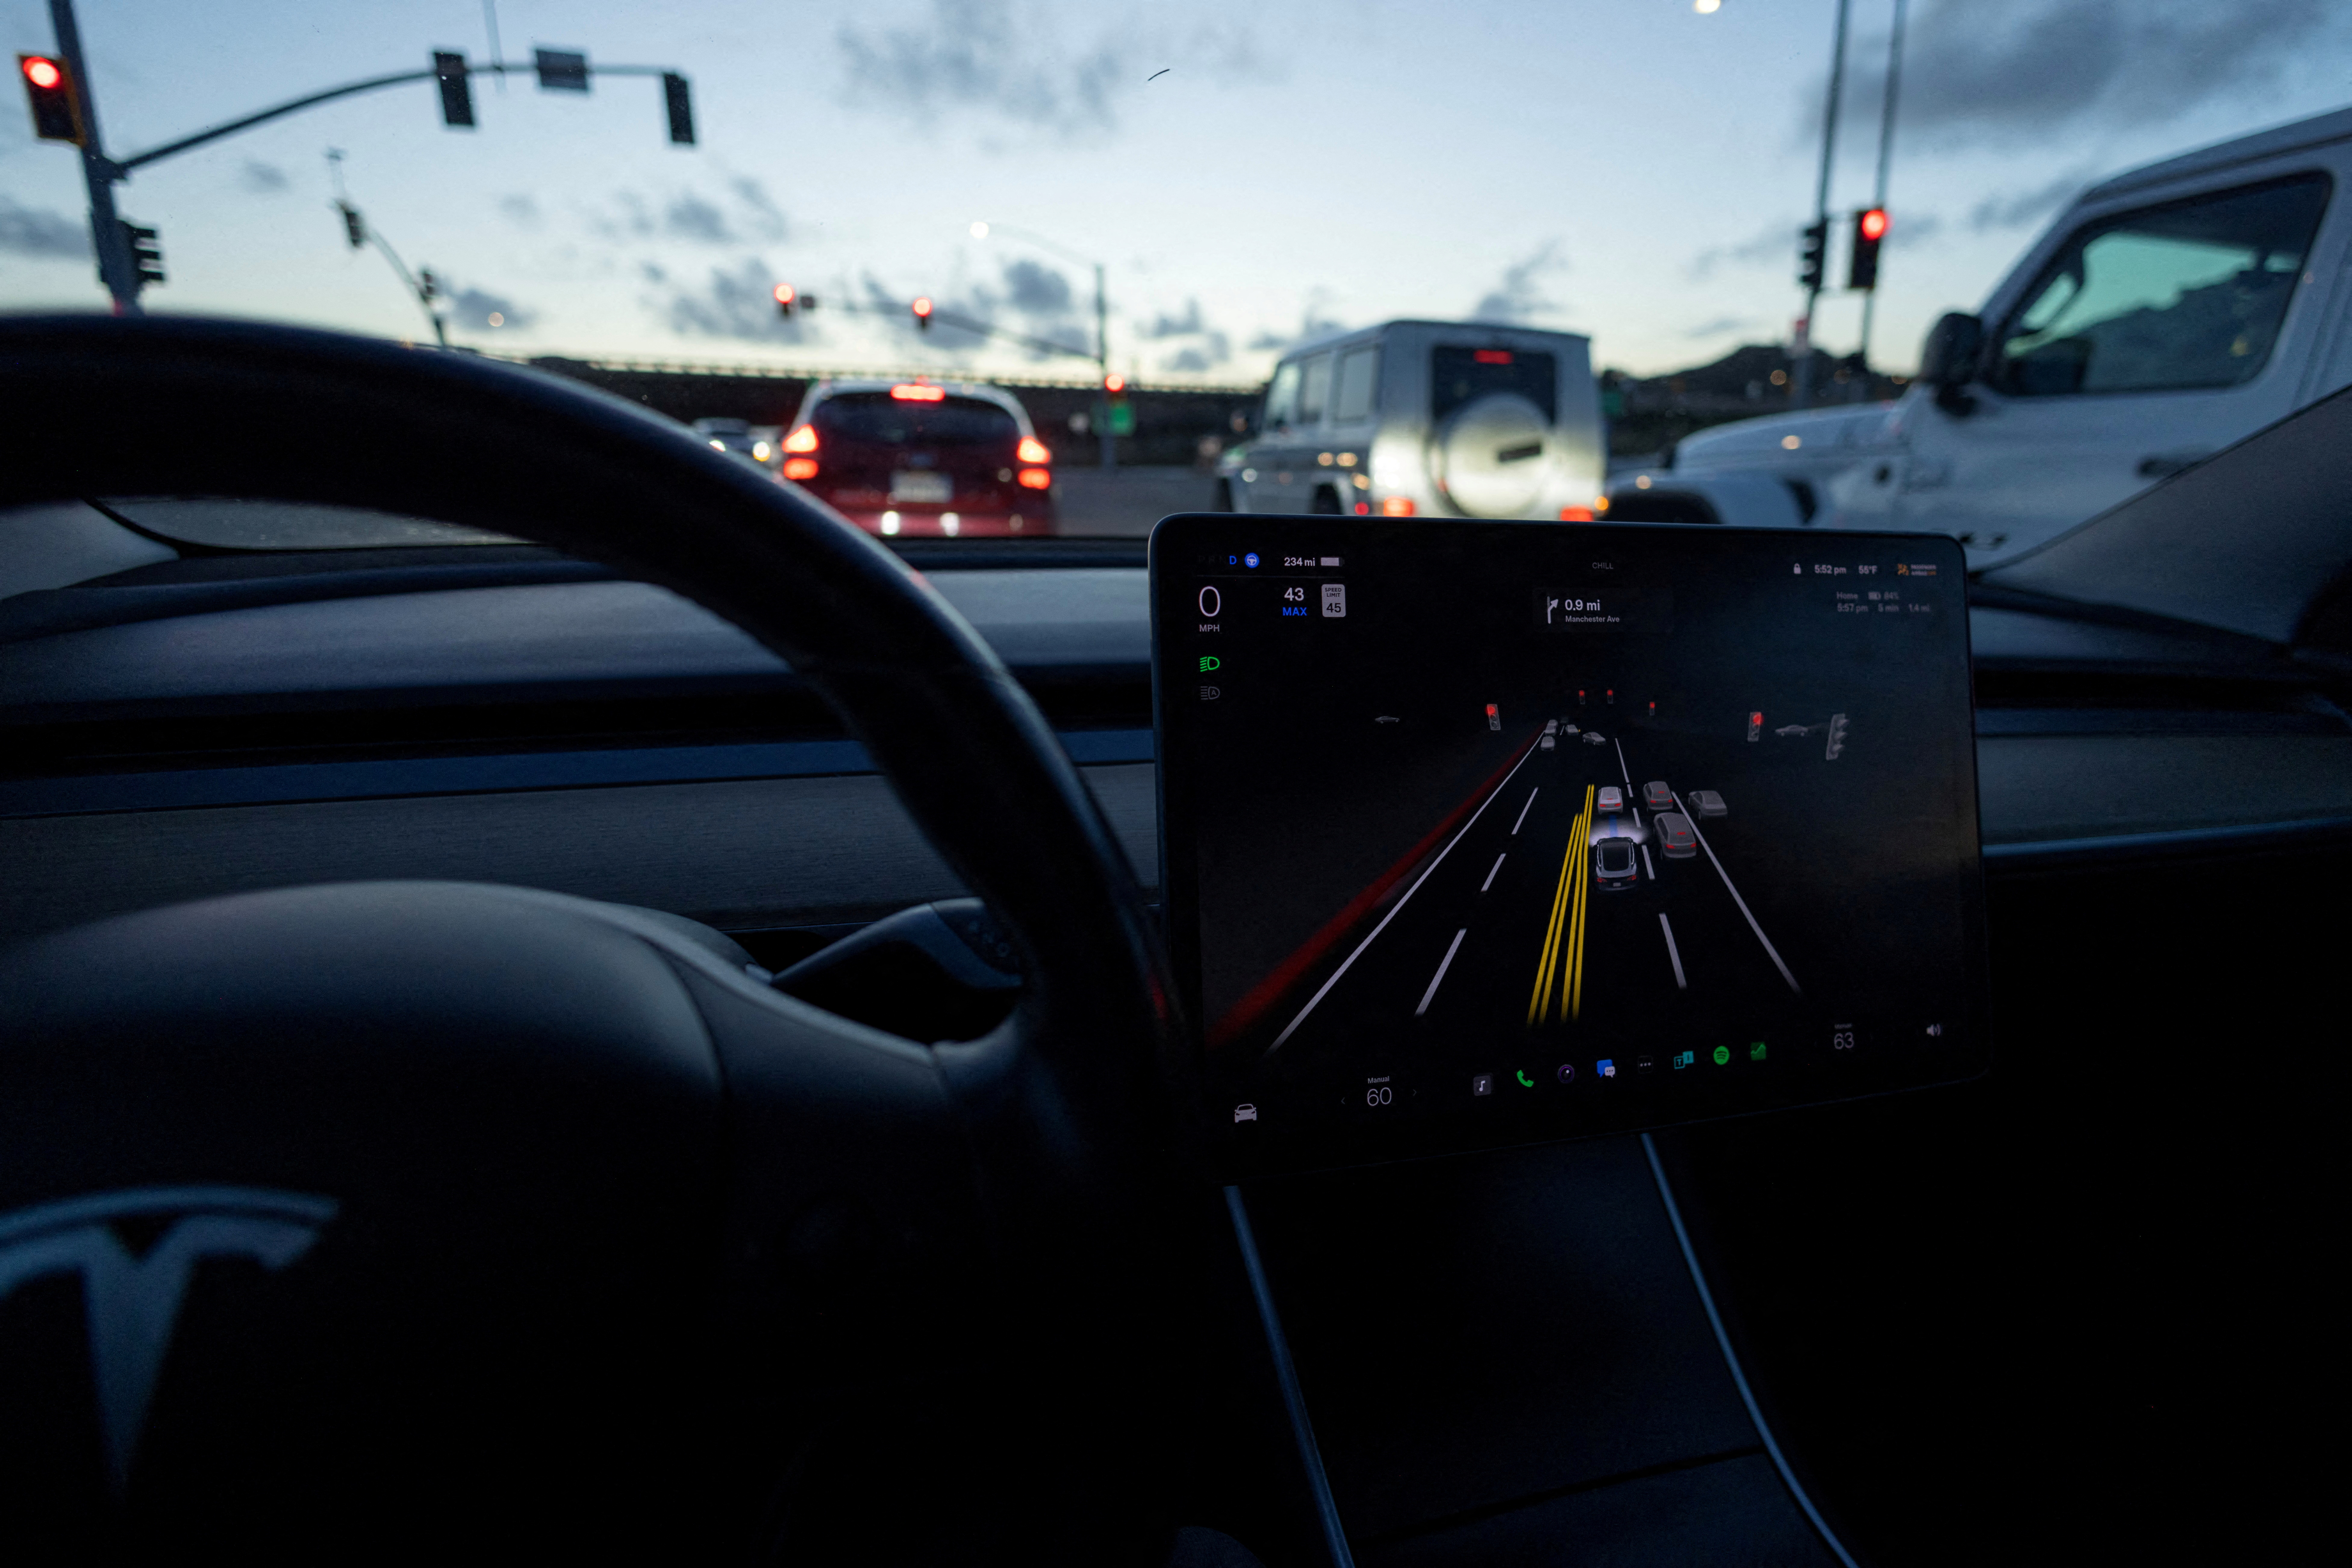 FILE PHOTO: A Tesla Model 3 vehicle is shown using the Autopilot Full Self Driving Beta software (FSD) while navigating a city road in Encinitas, California, February 2023.    REUTERS/Mike Blake